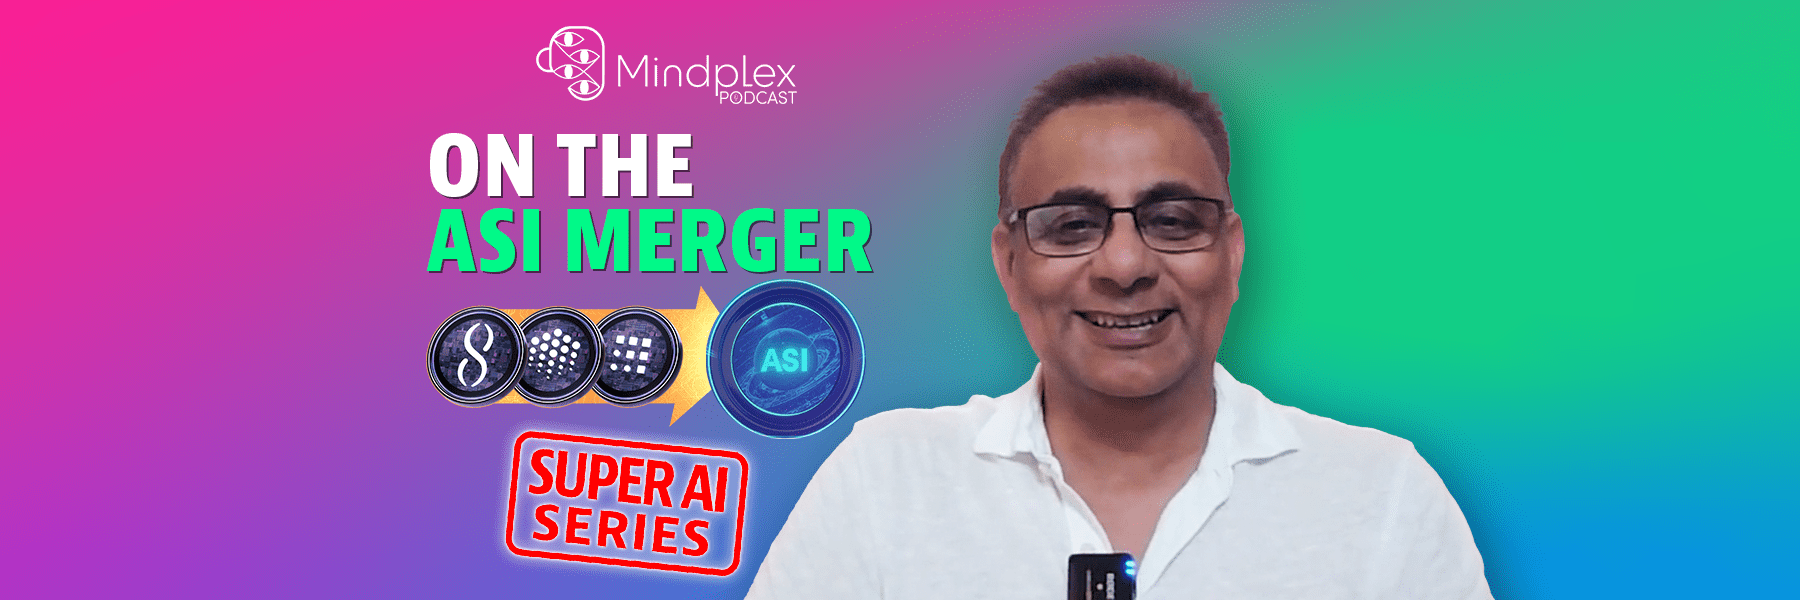 Why The ASI Token Merger Is Revolutionary: Super AI Series – Part 4